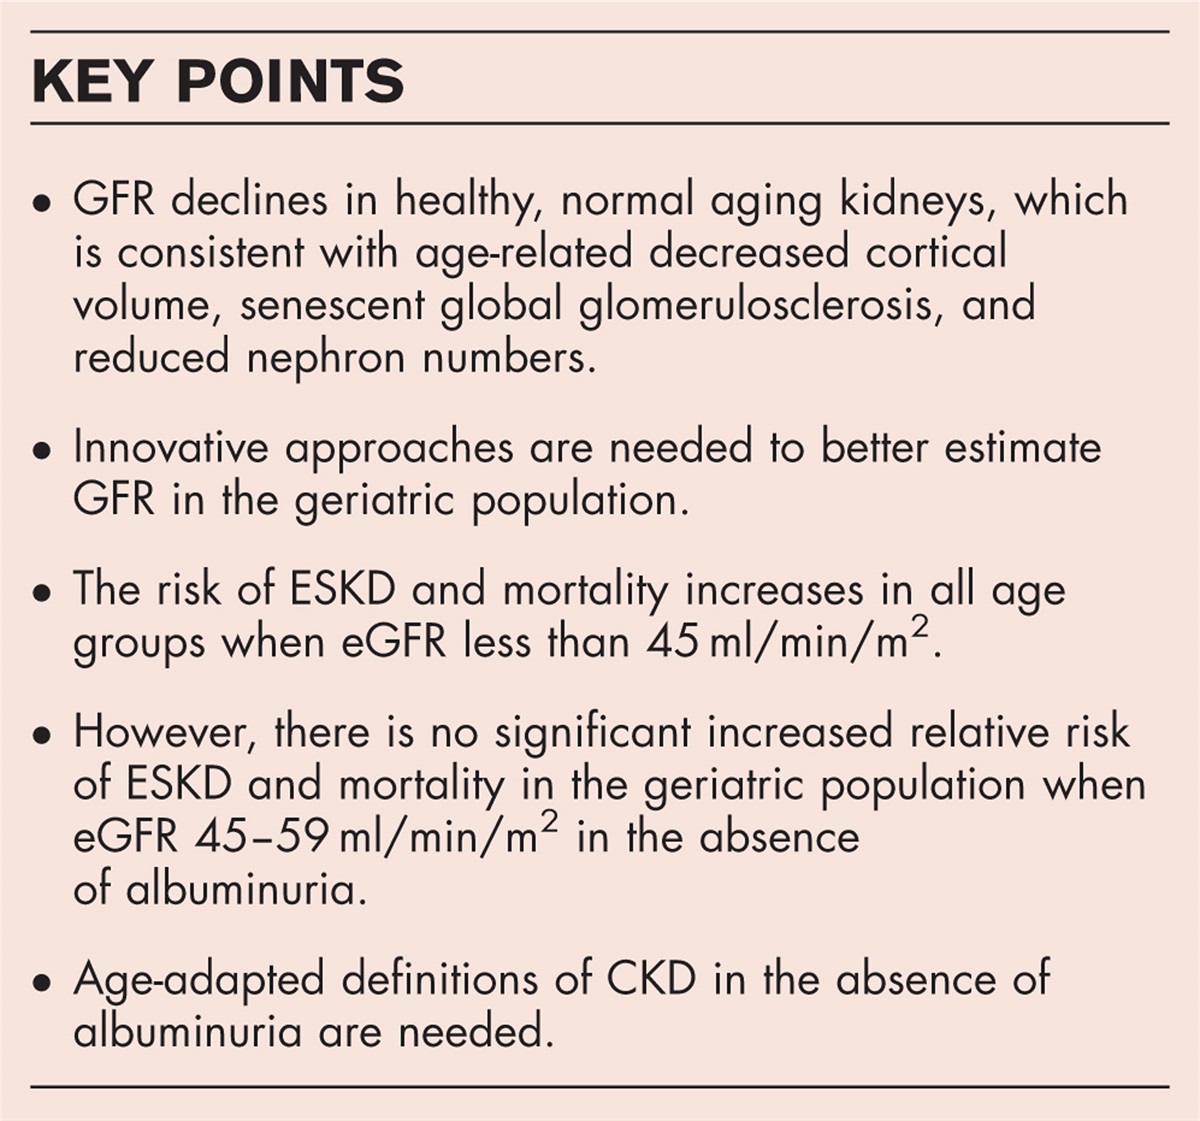 Kidney function assessment in the geriatric population